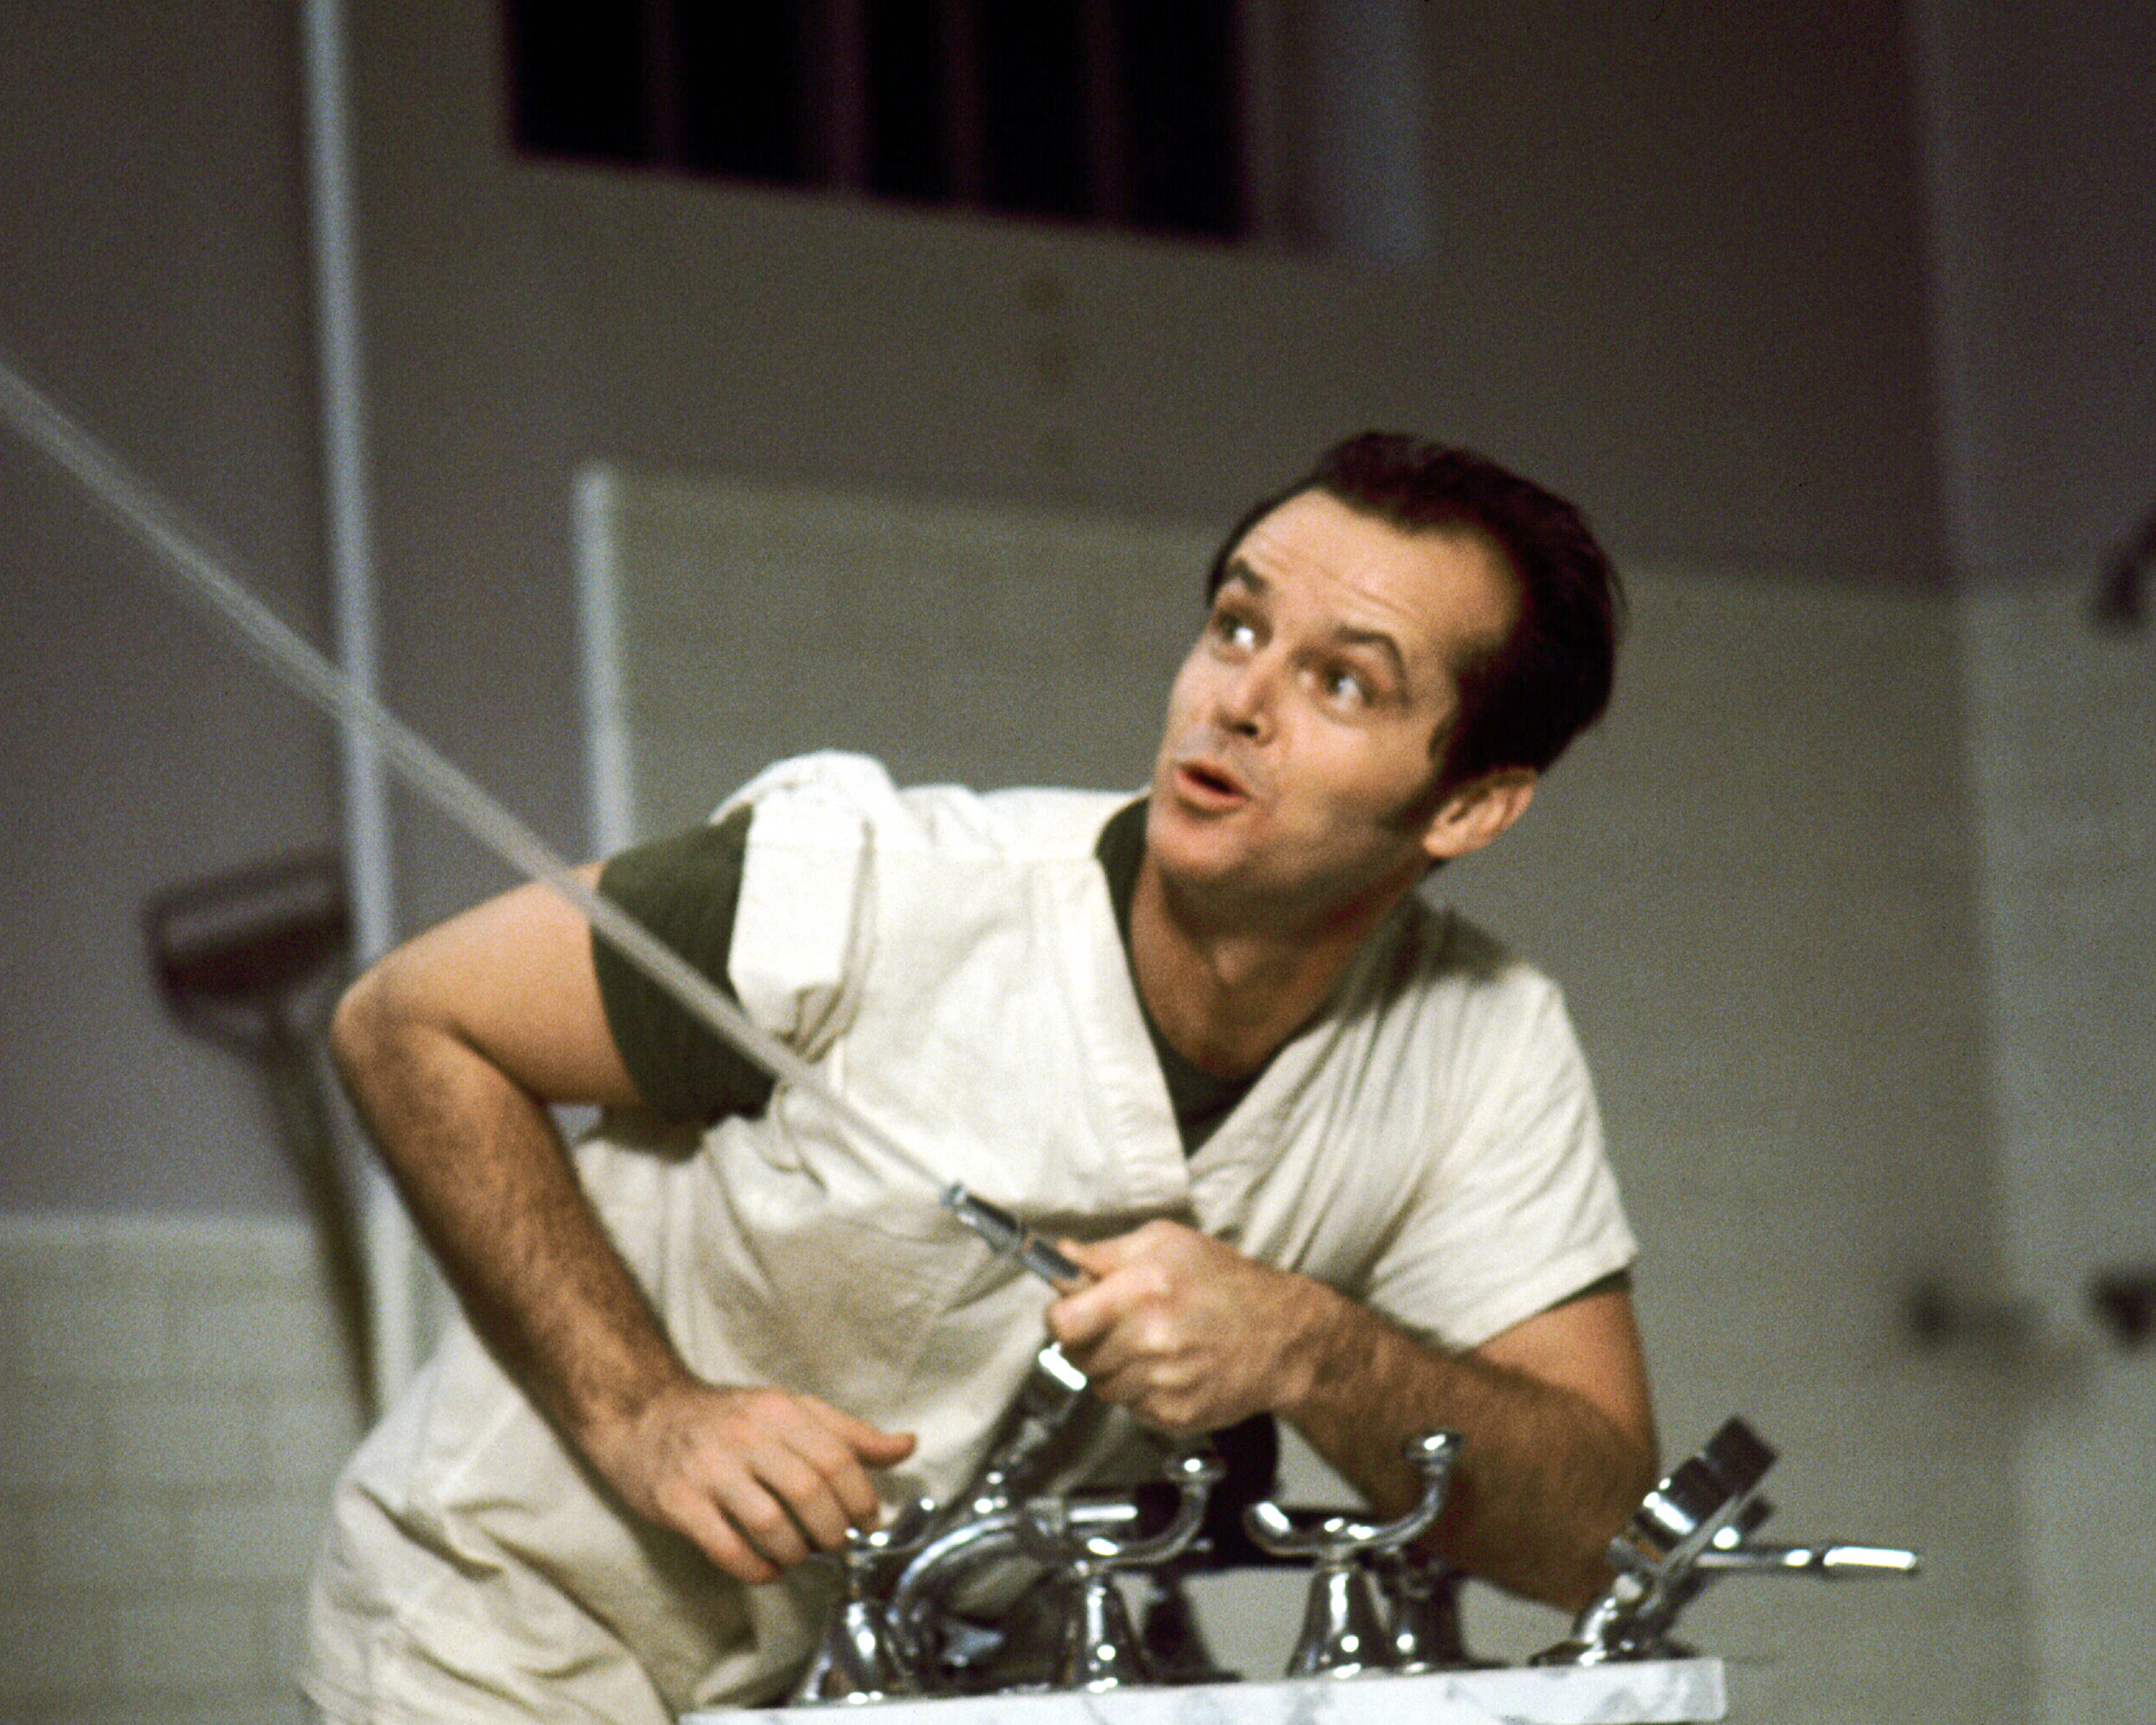 Jack Nicholson in One Flew Over the Cuckoo's Nest (1975)